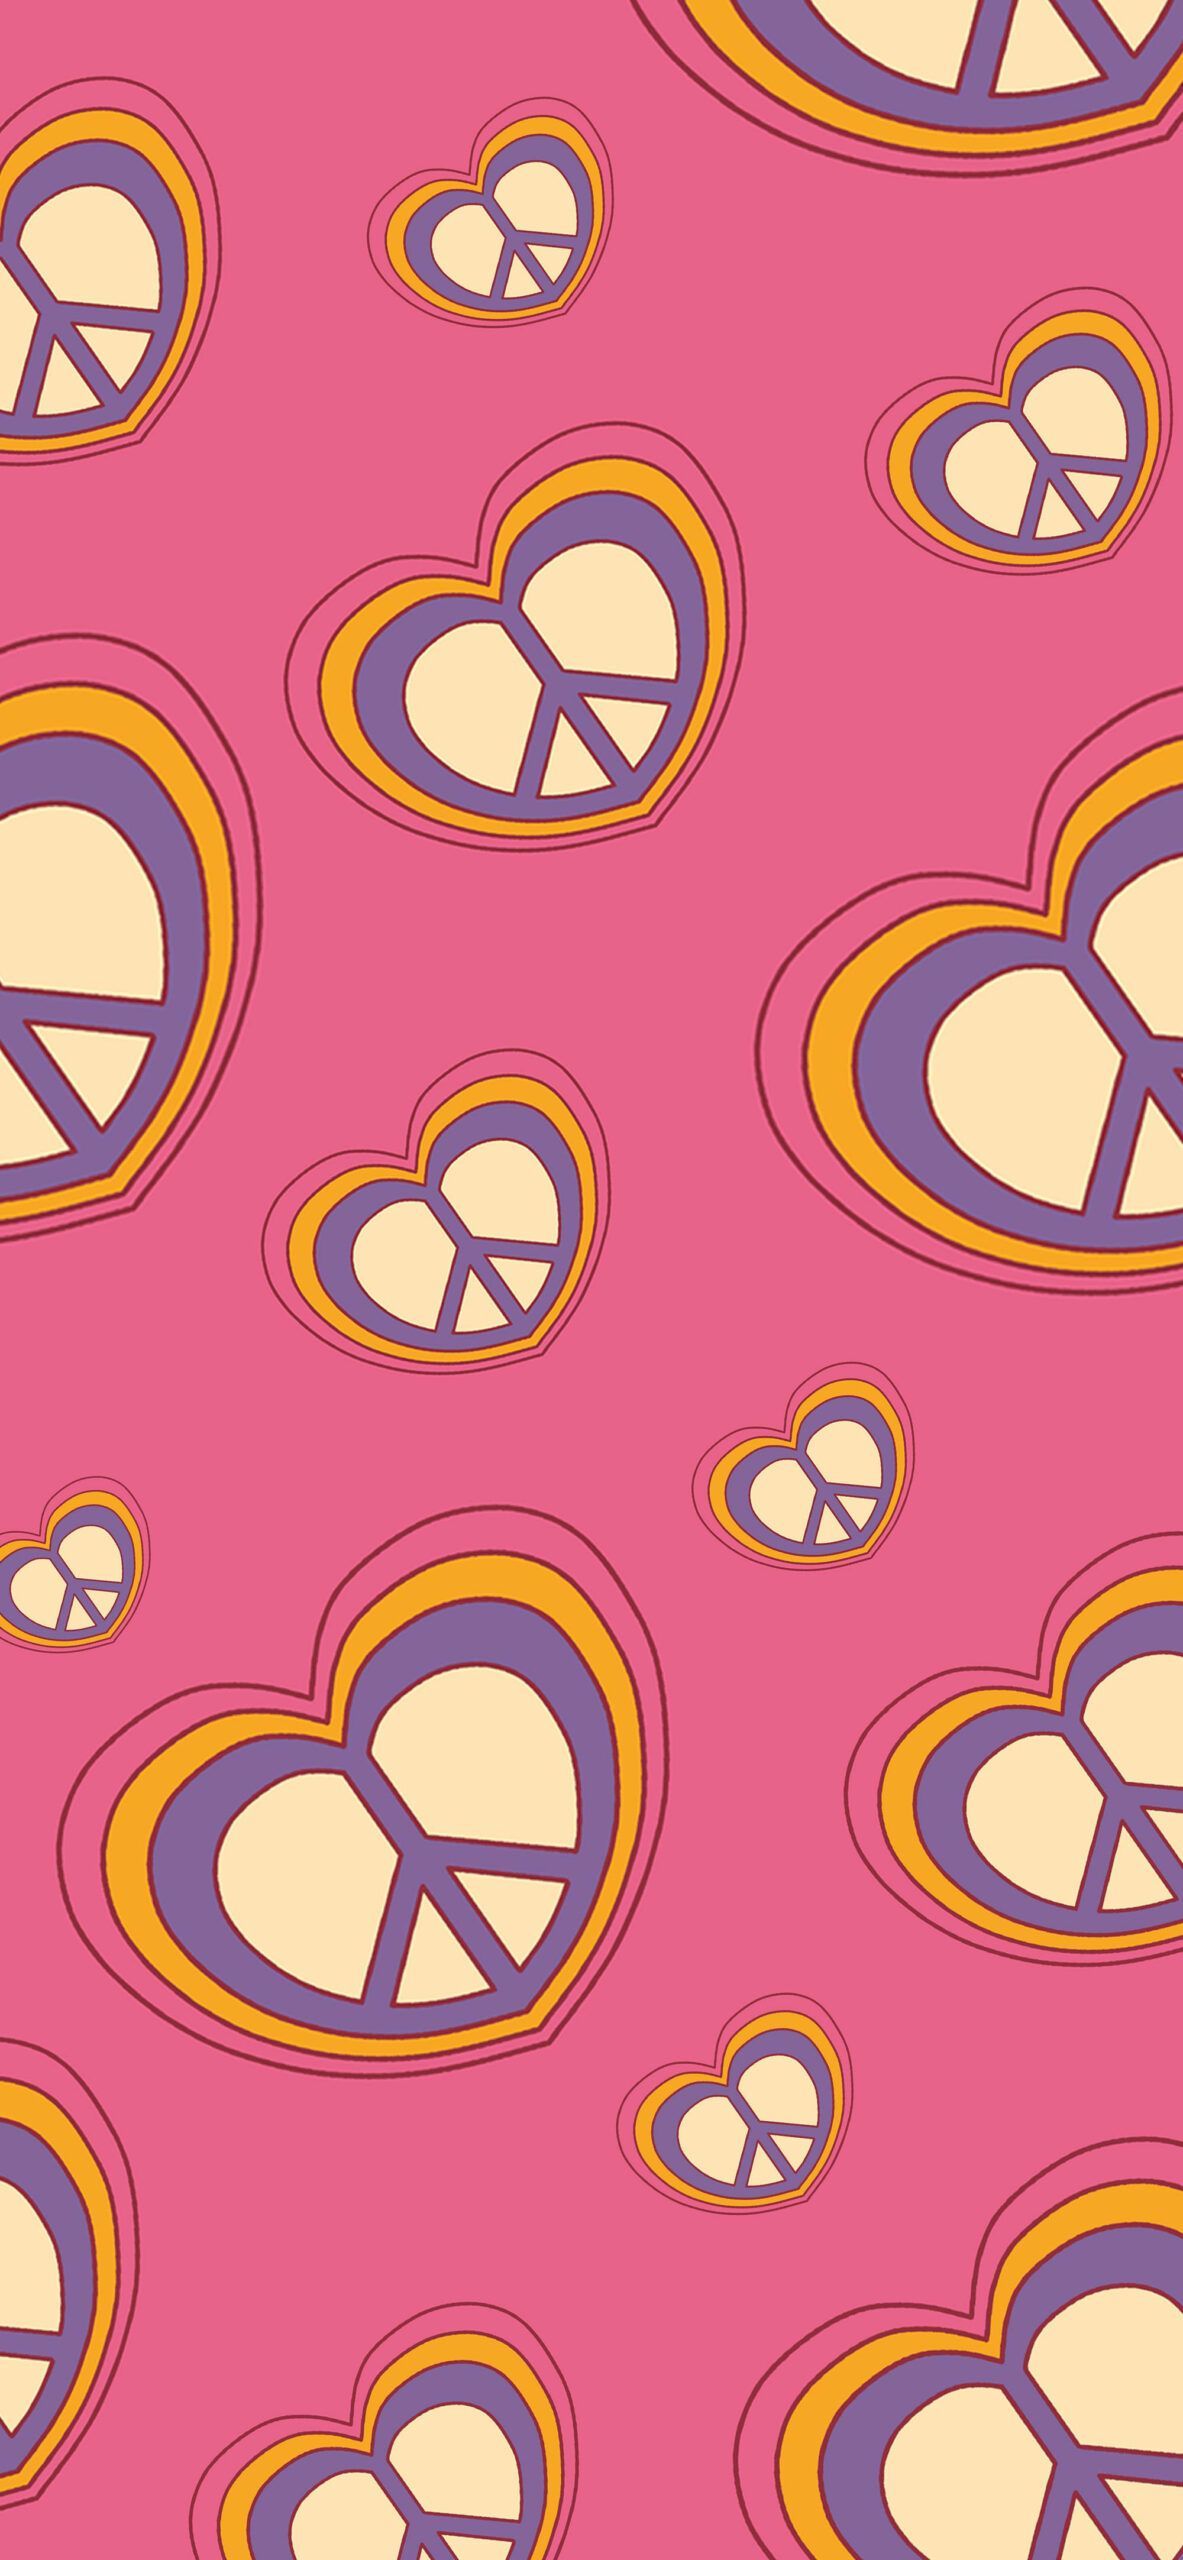 A pattern of hearts and peace signs on pink background - Peace